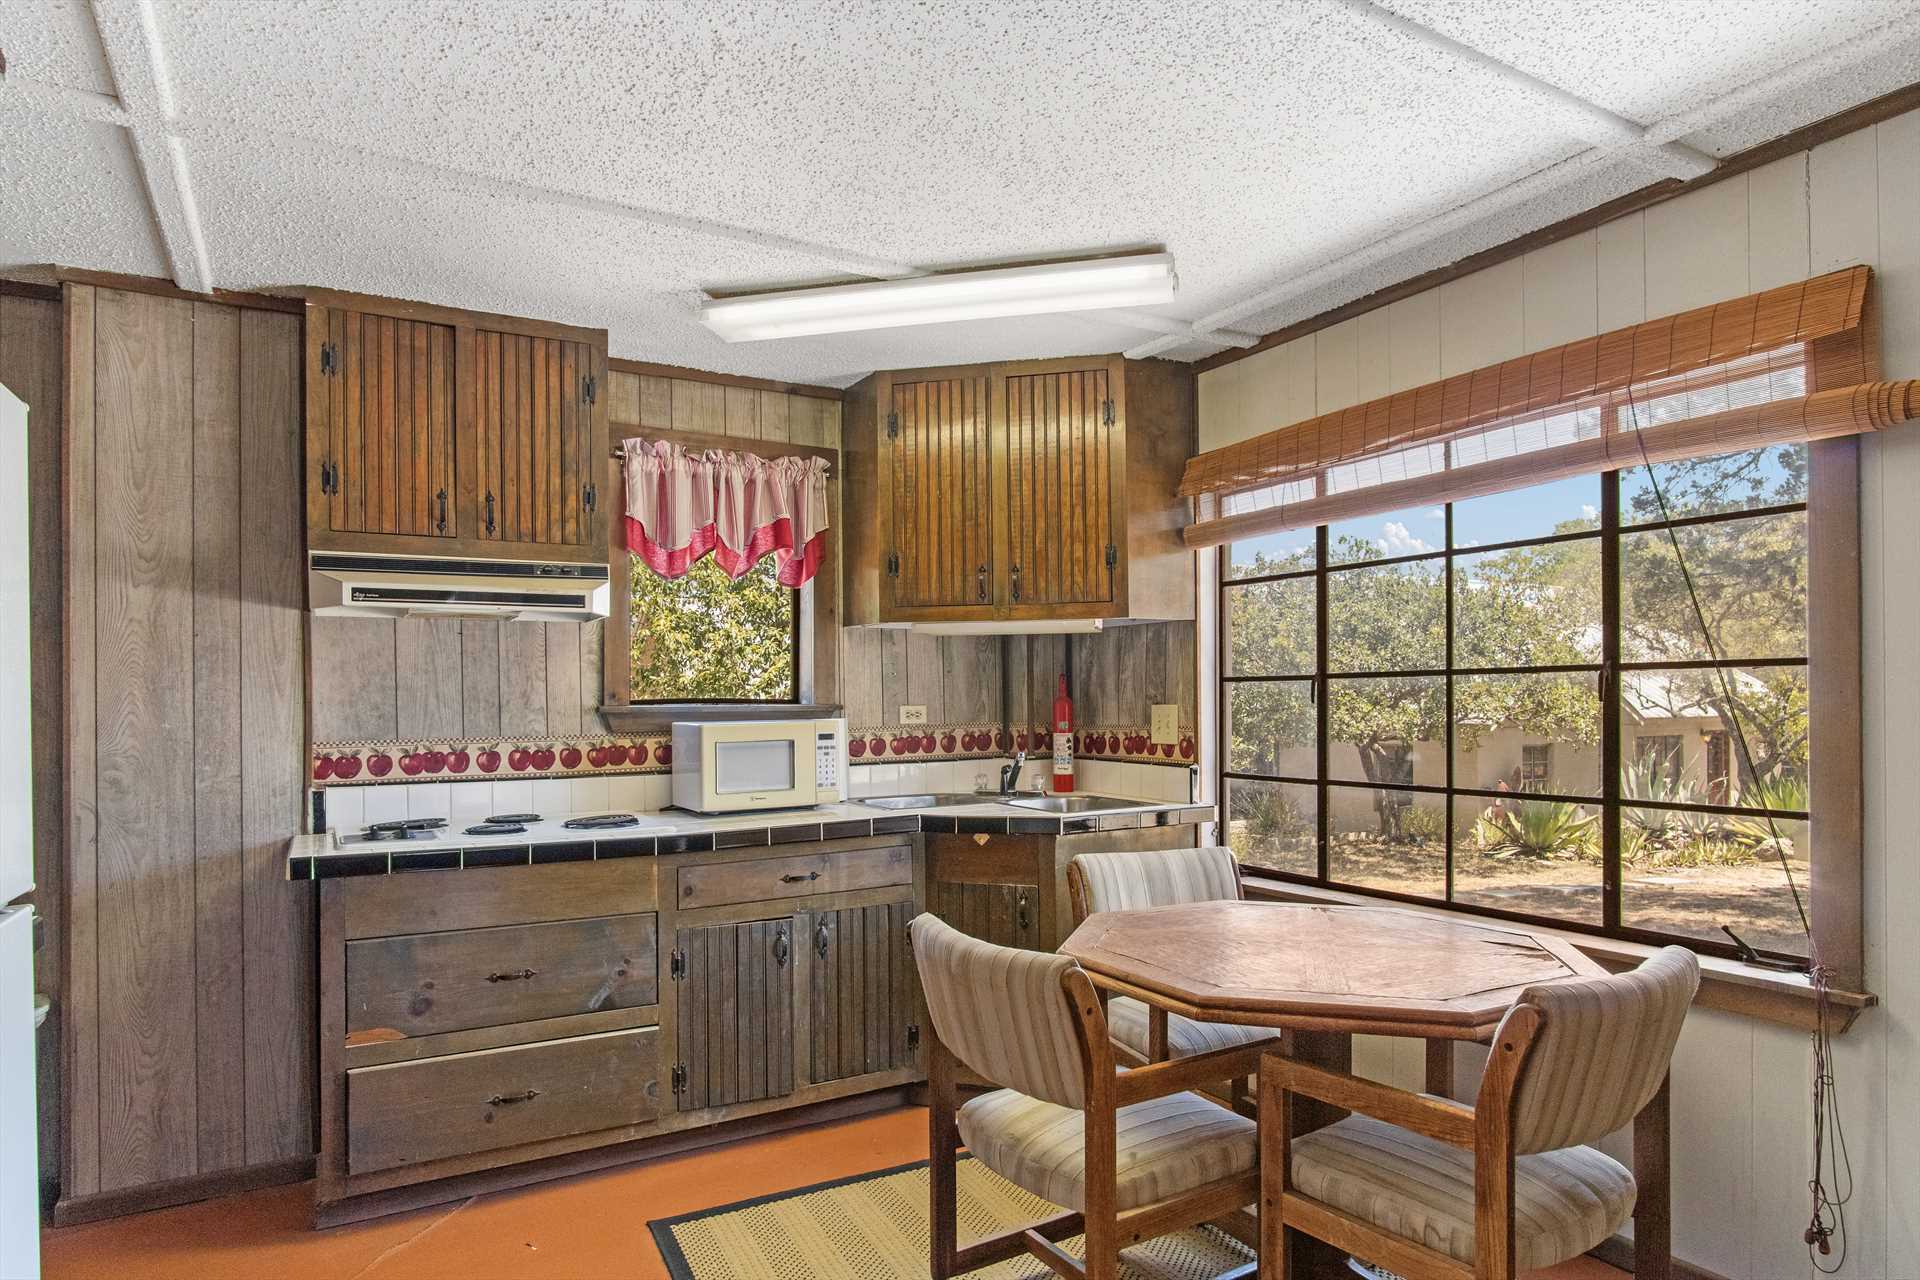                                                 A fridge, microwave, and stove top are included in the Casita kitchen, alongside a handy dining nook.